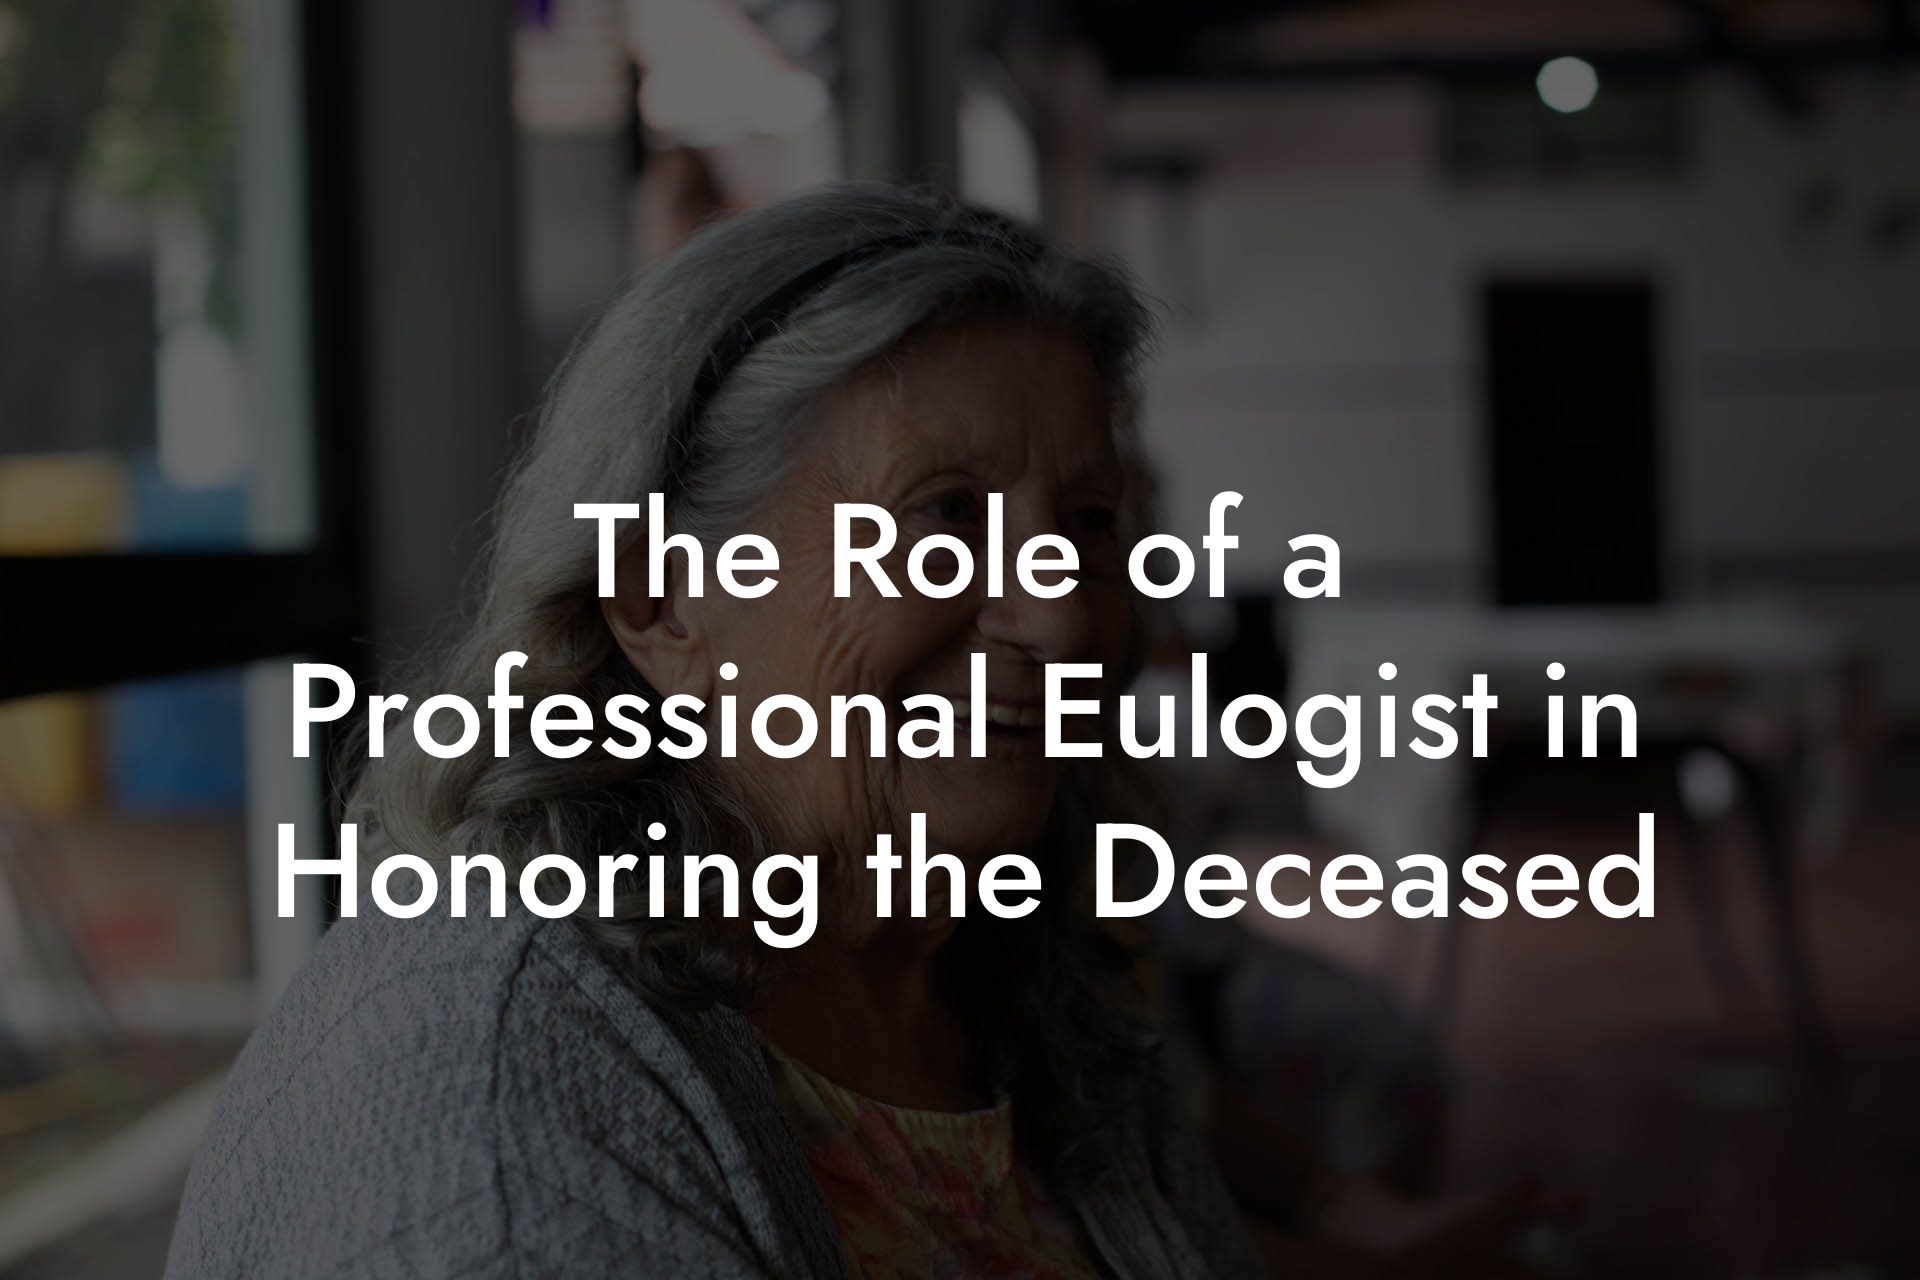 The Role of a Professional Eulogist in Honoring the Deceased